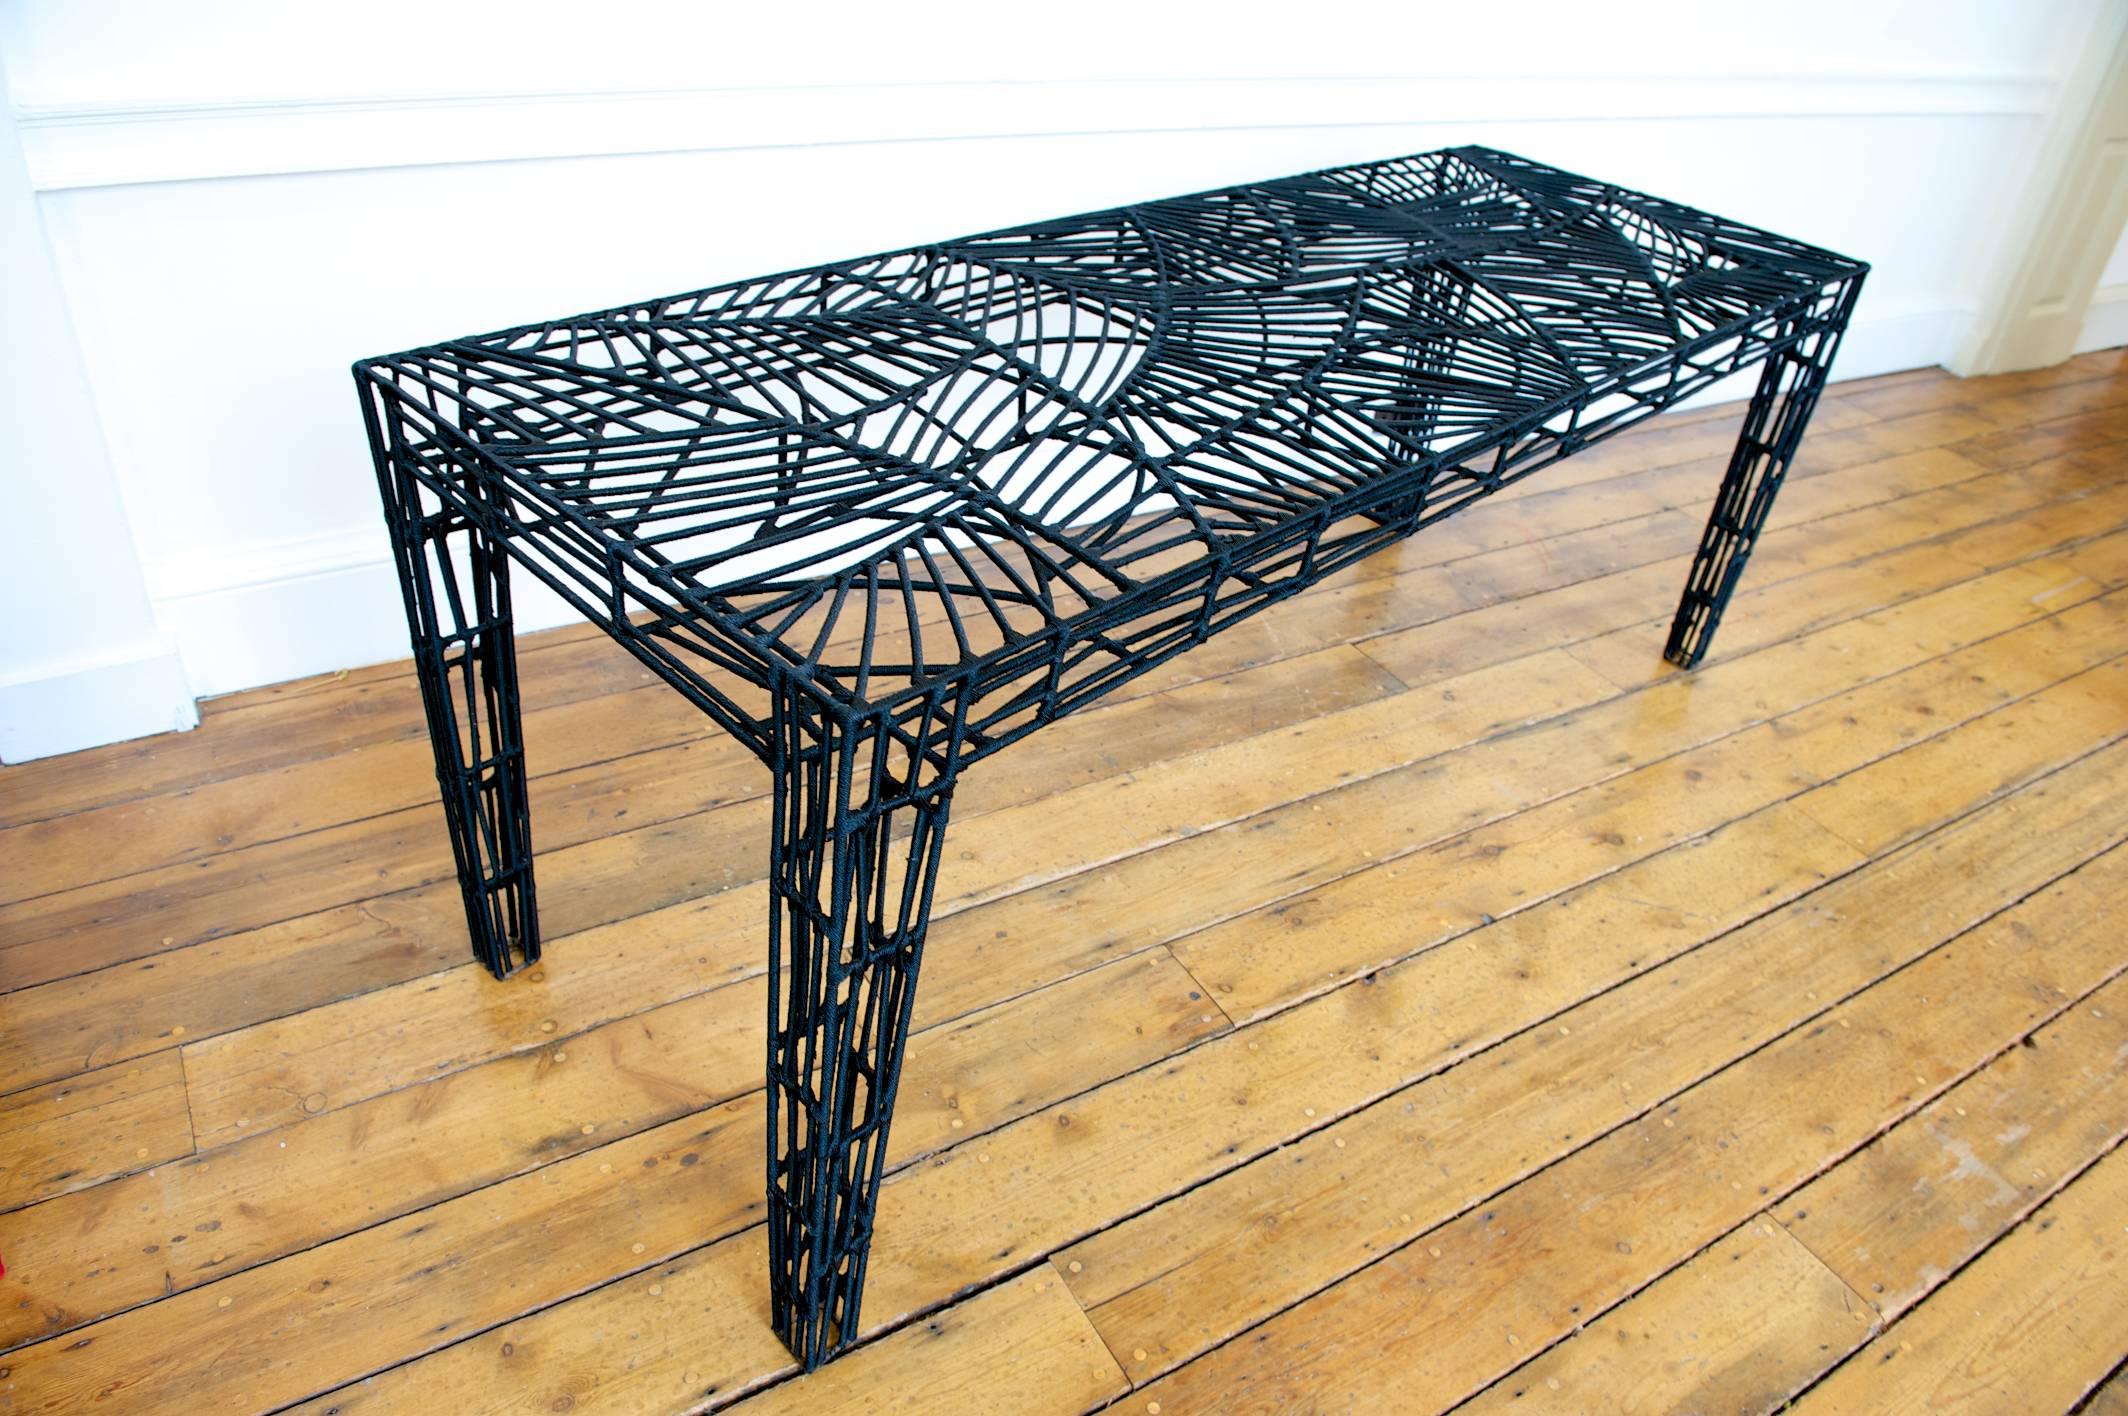 Metal Contemporary Mandet Table from recycled metal and nylon wires by Cheick Diallo For Sale